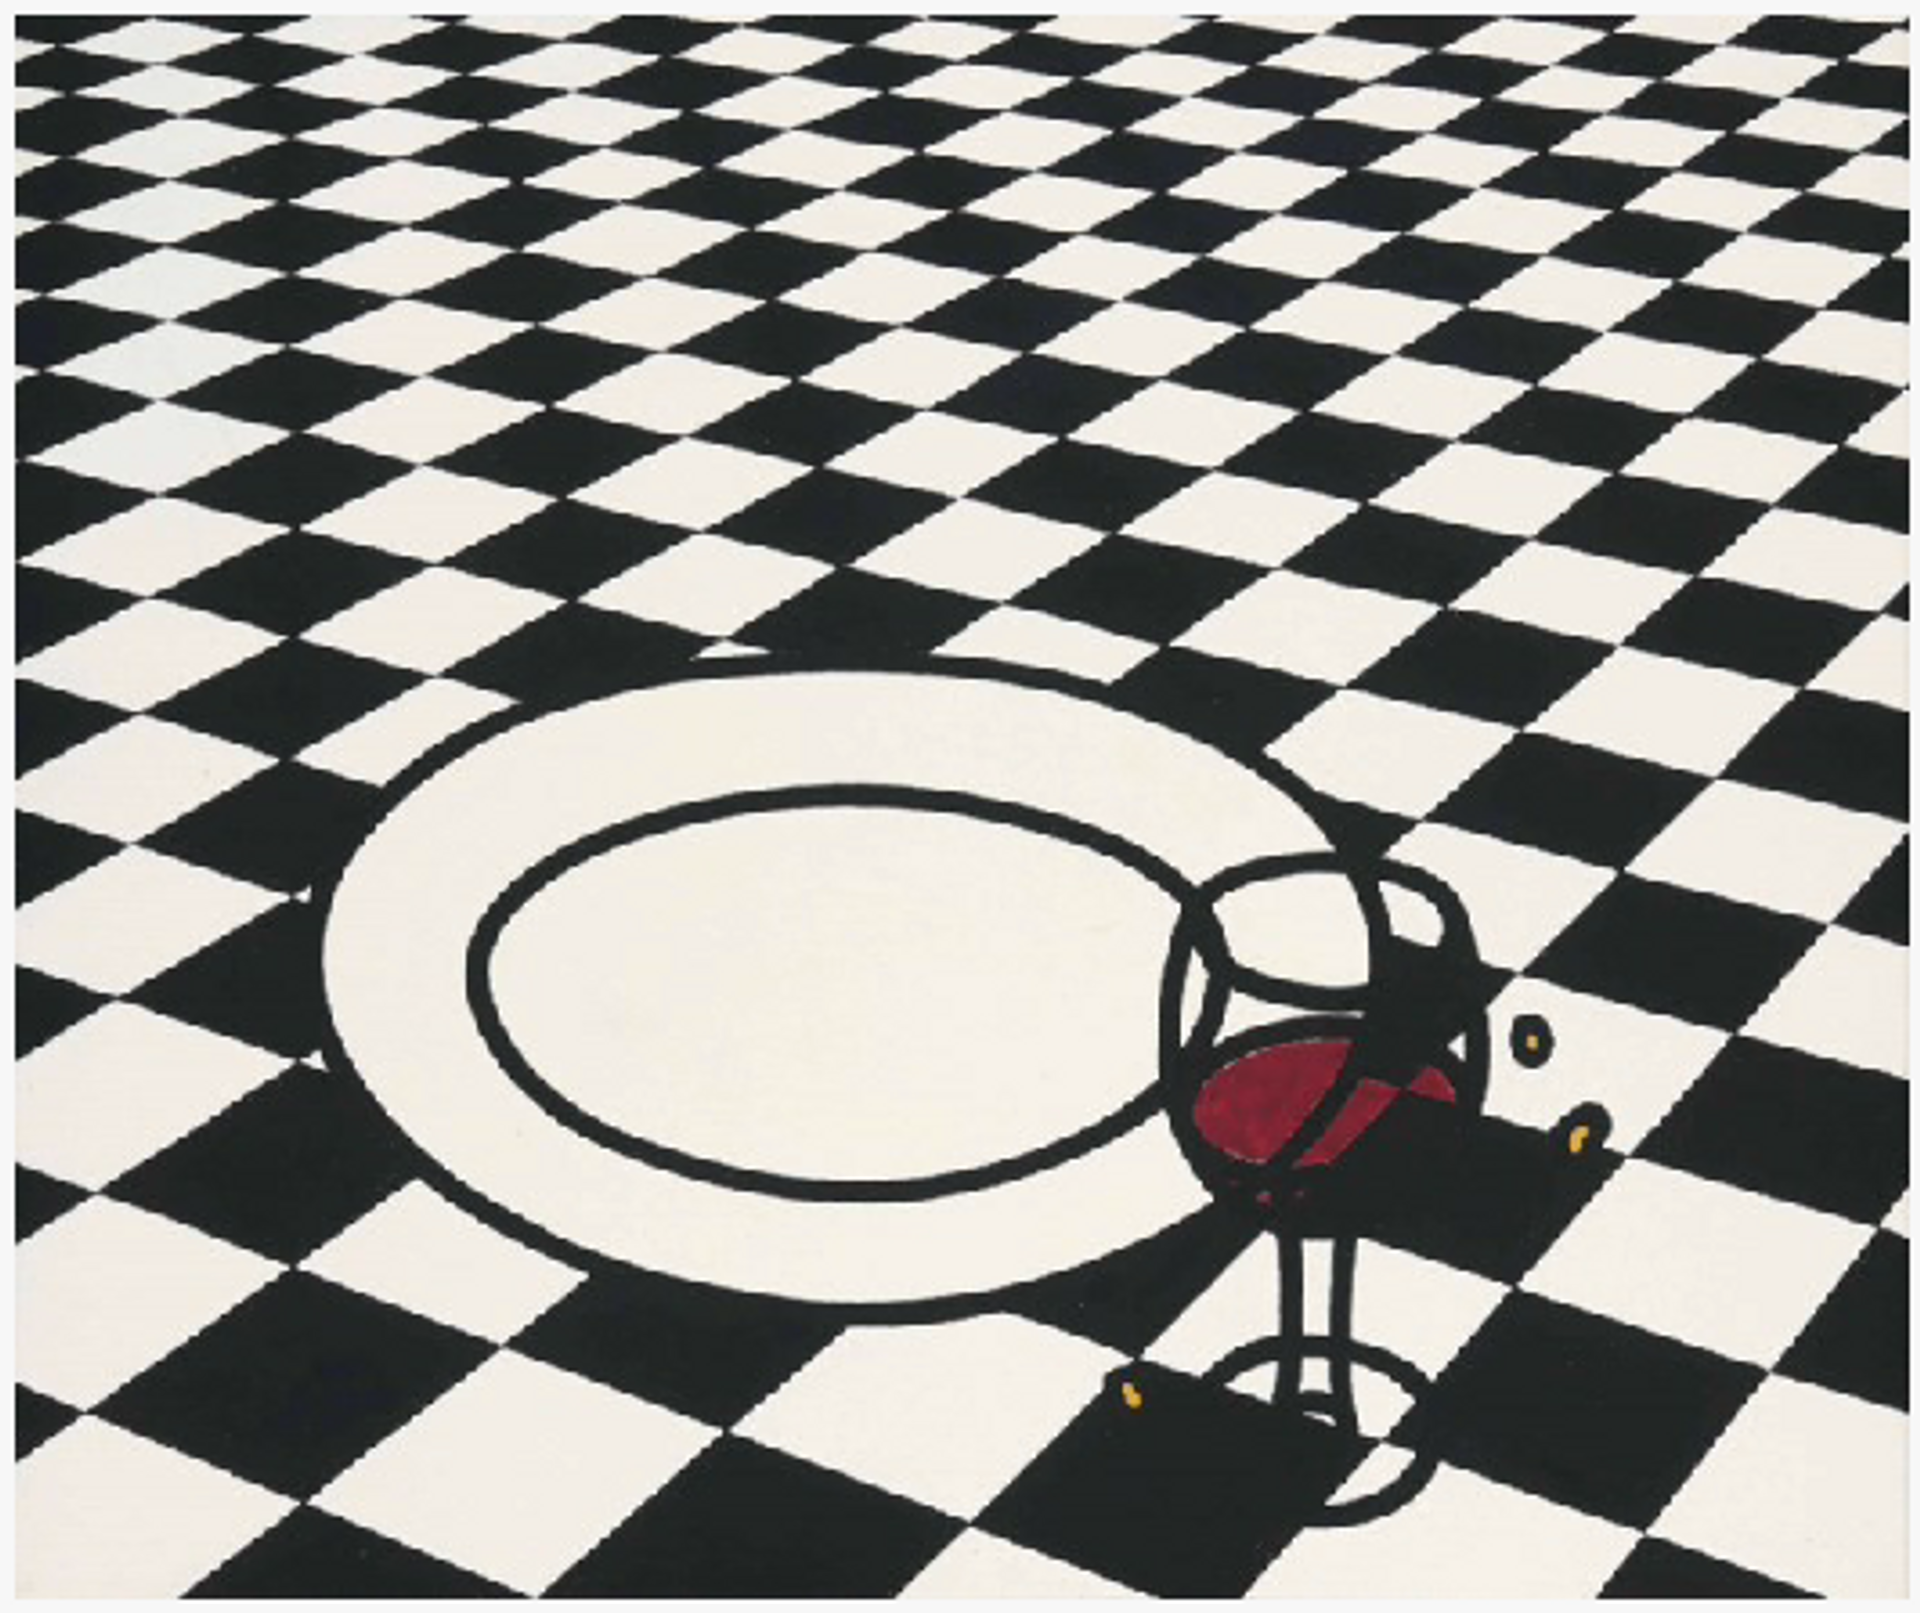 Graphic depiction of a half-filled wine glass alongside an empty white plate on a black-and-white checkered tablecloth.